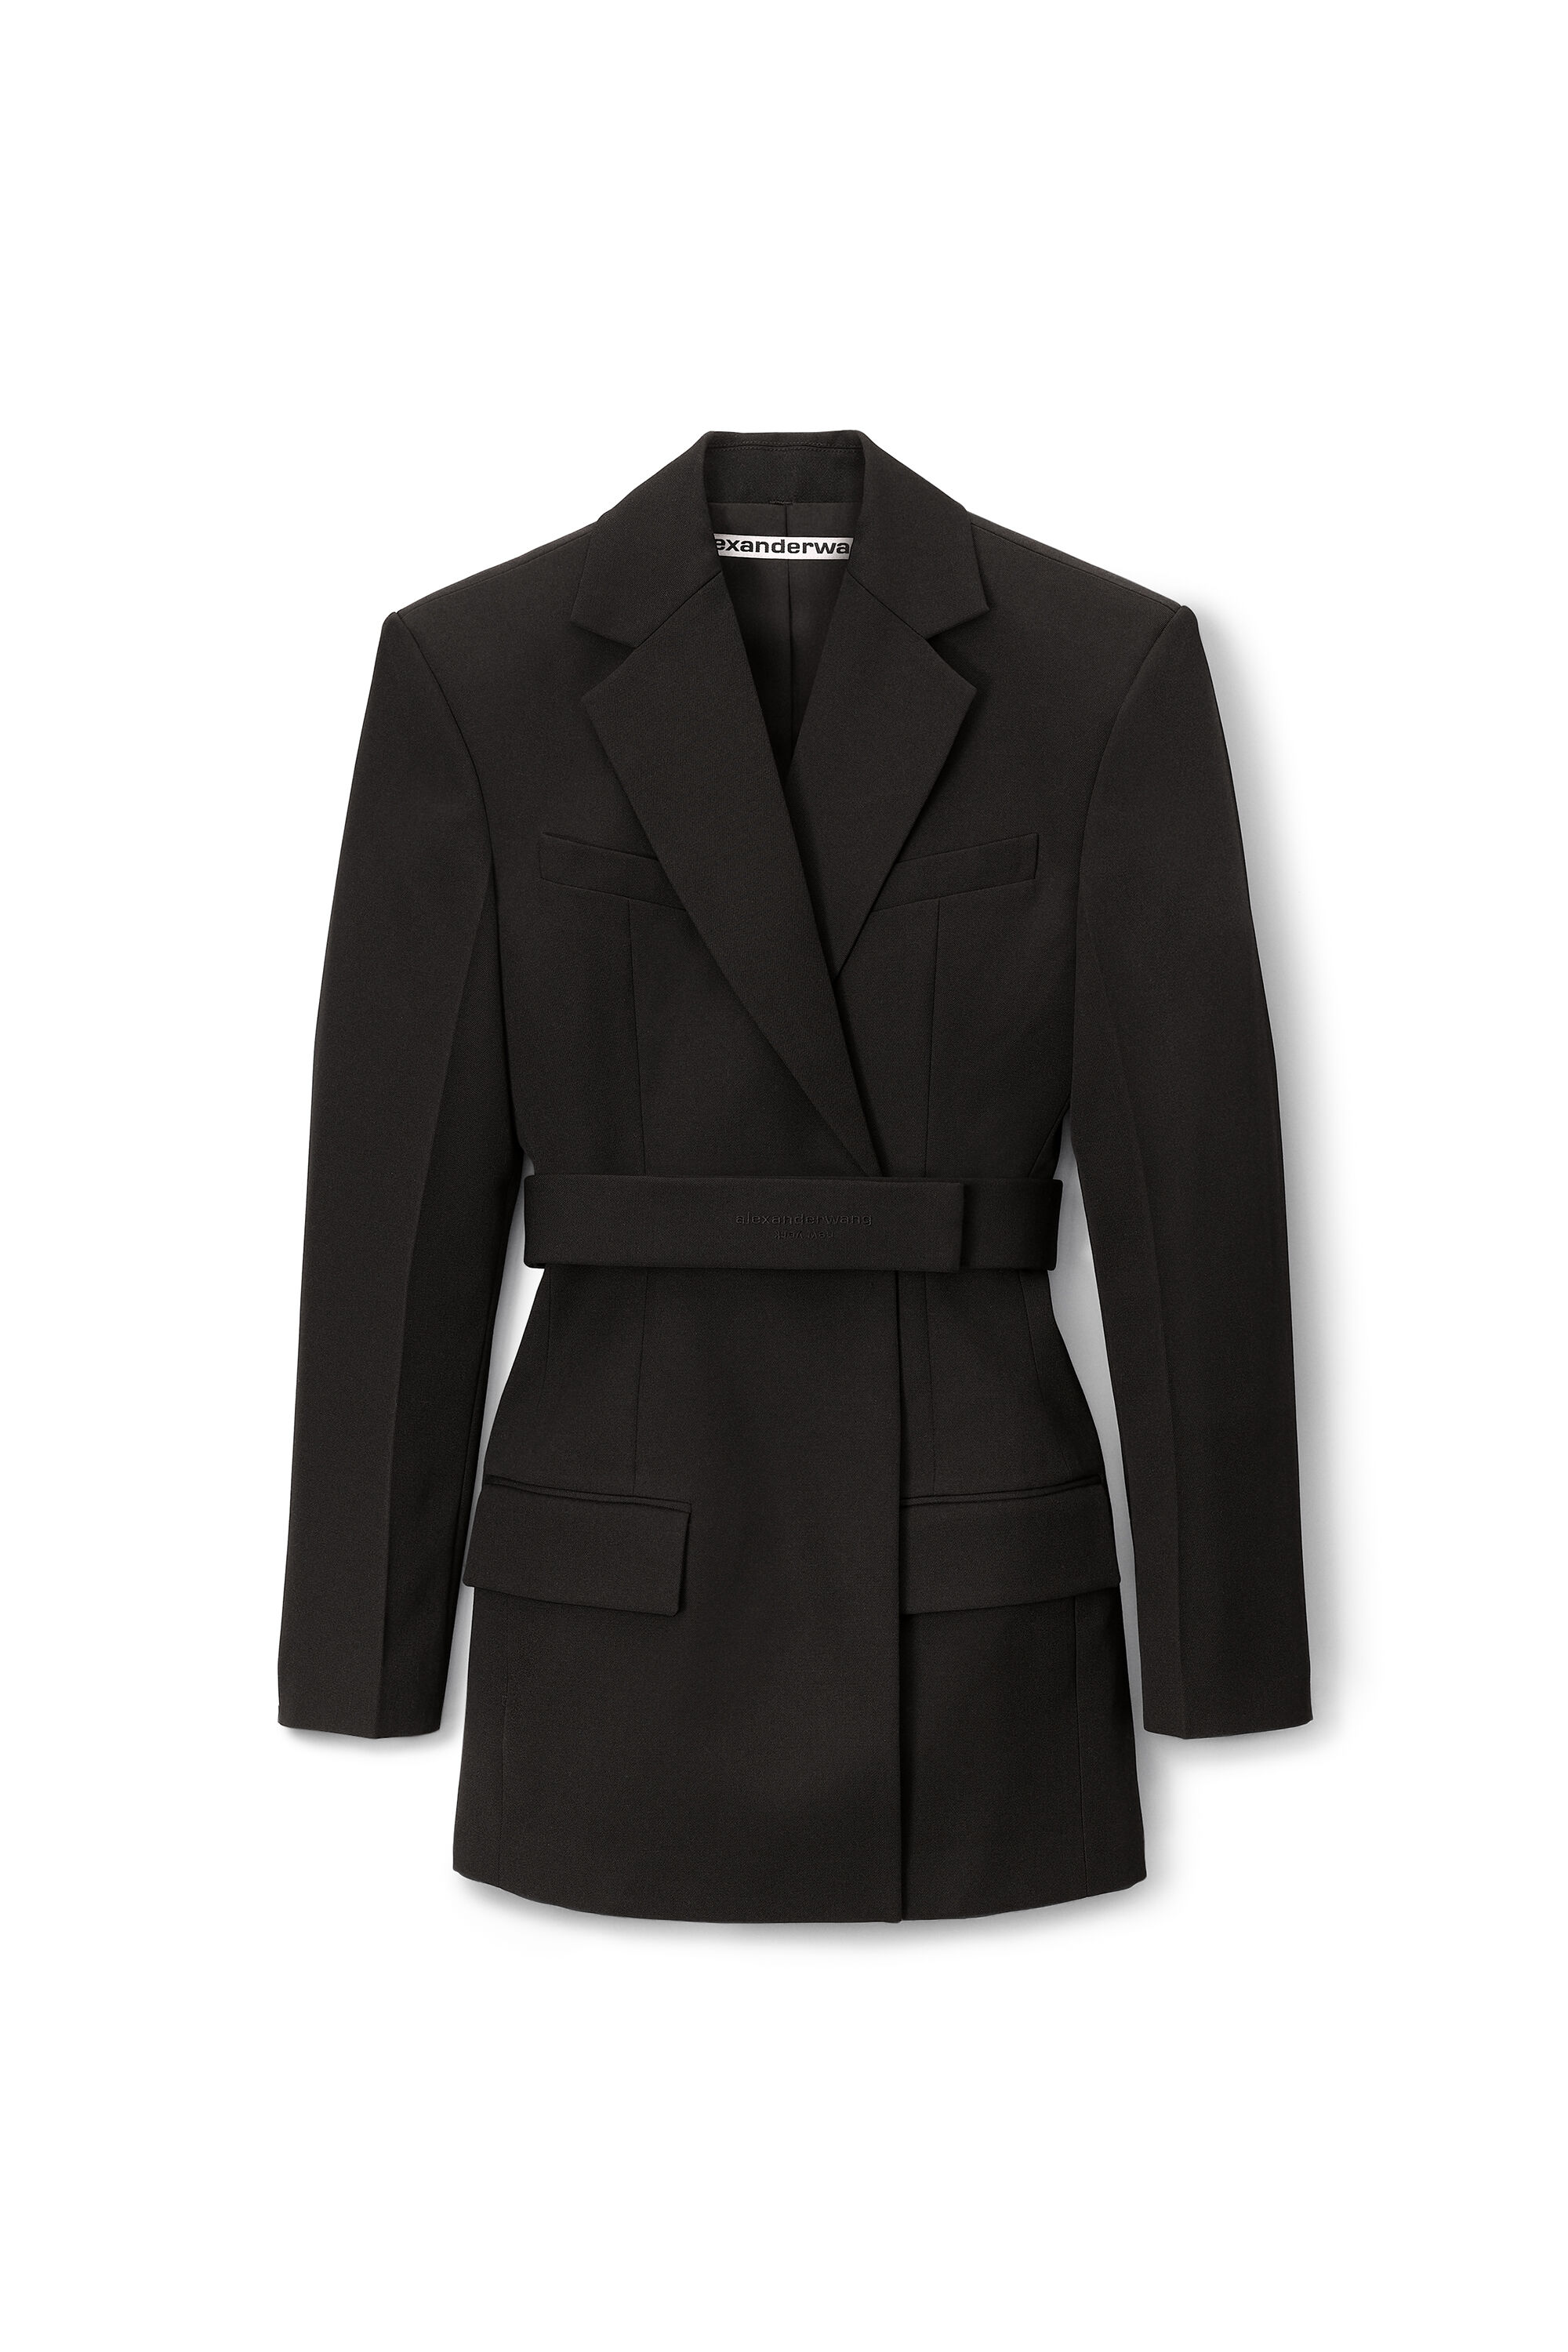 BELTED BLAZER DRESS IN WOOL TAILORING in BLACK | fitted 